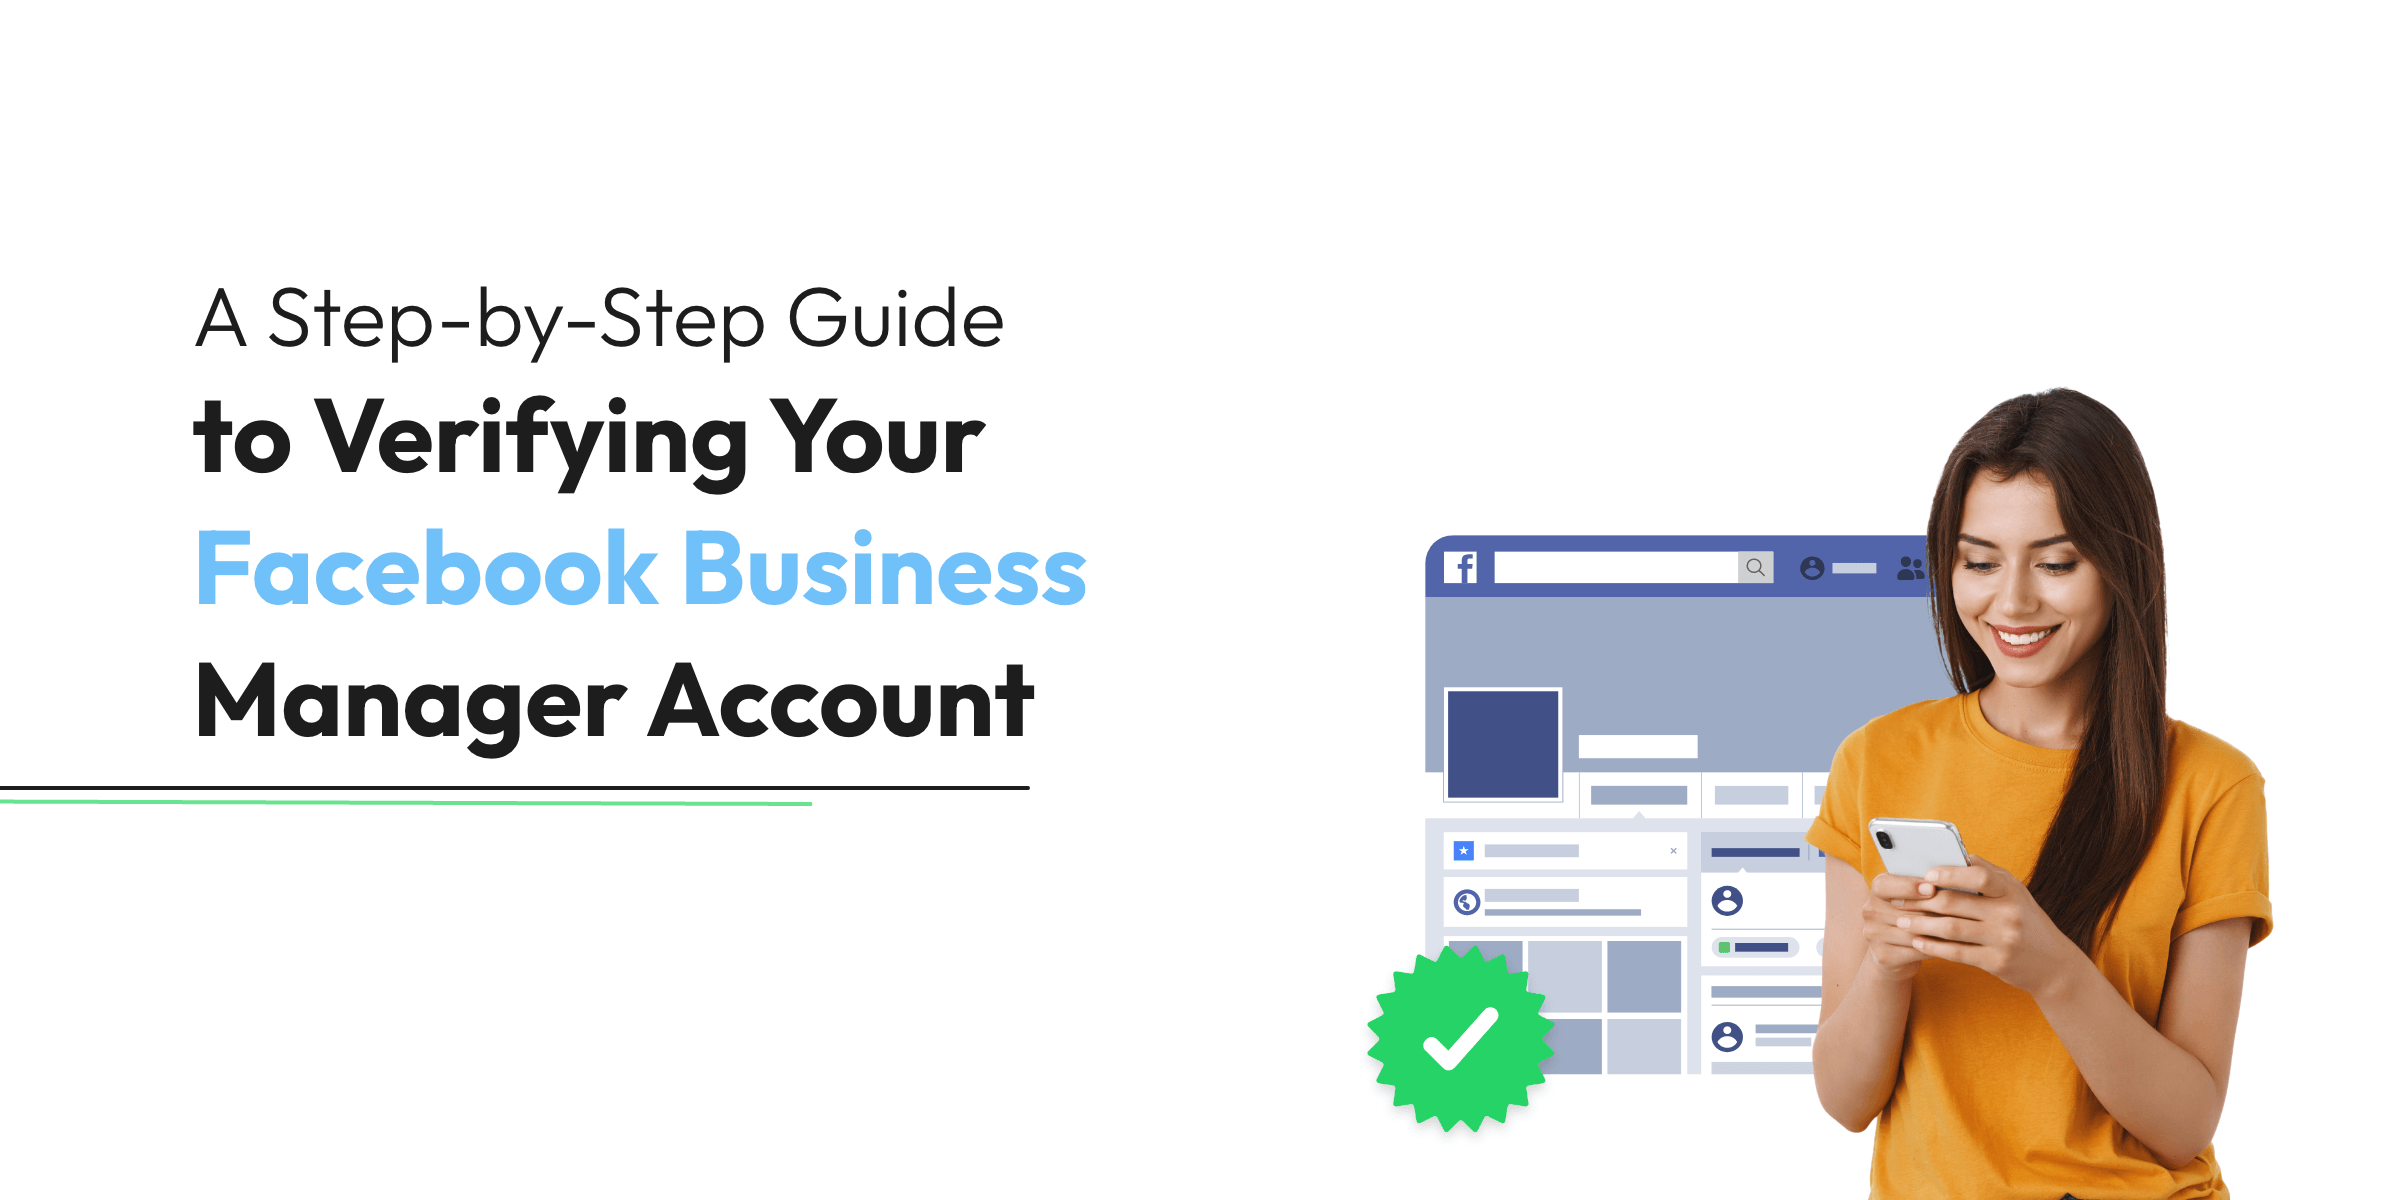 Link Instagram to Facebook: The 2023 Step-by-Step Guide